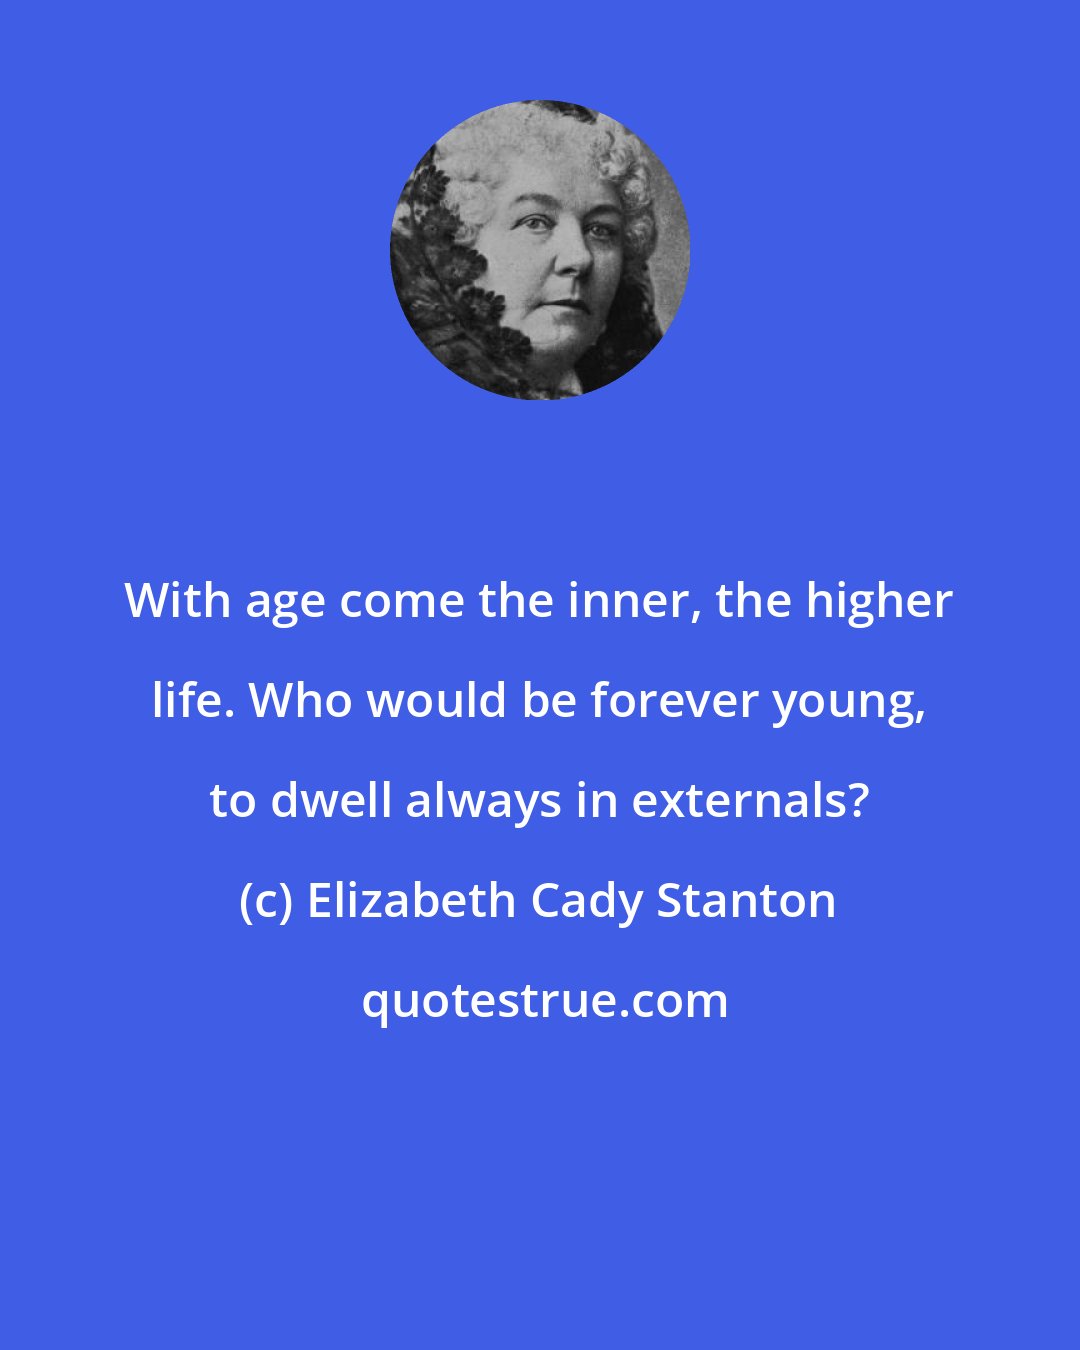 Elizabeth Cady Stanton: With age come the inner, the higher life. Who would be forever young, to dwell always in externals?